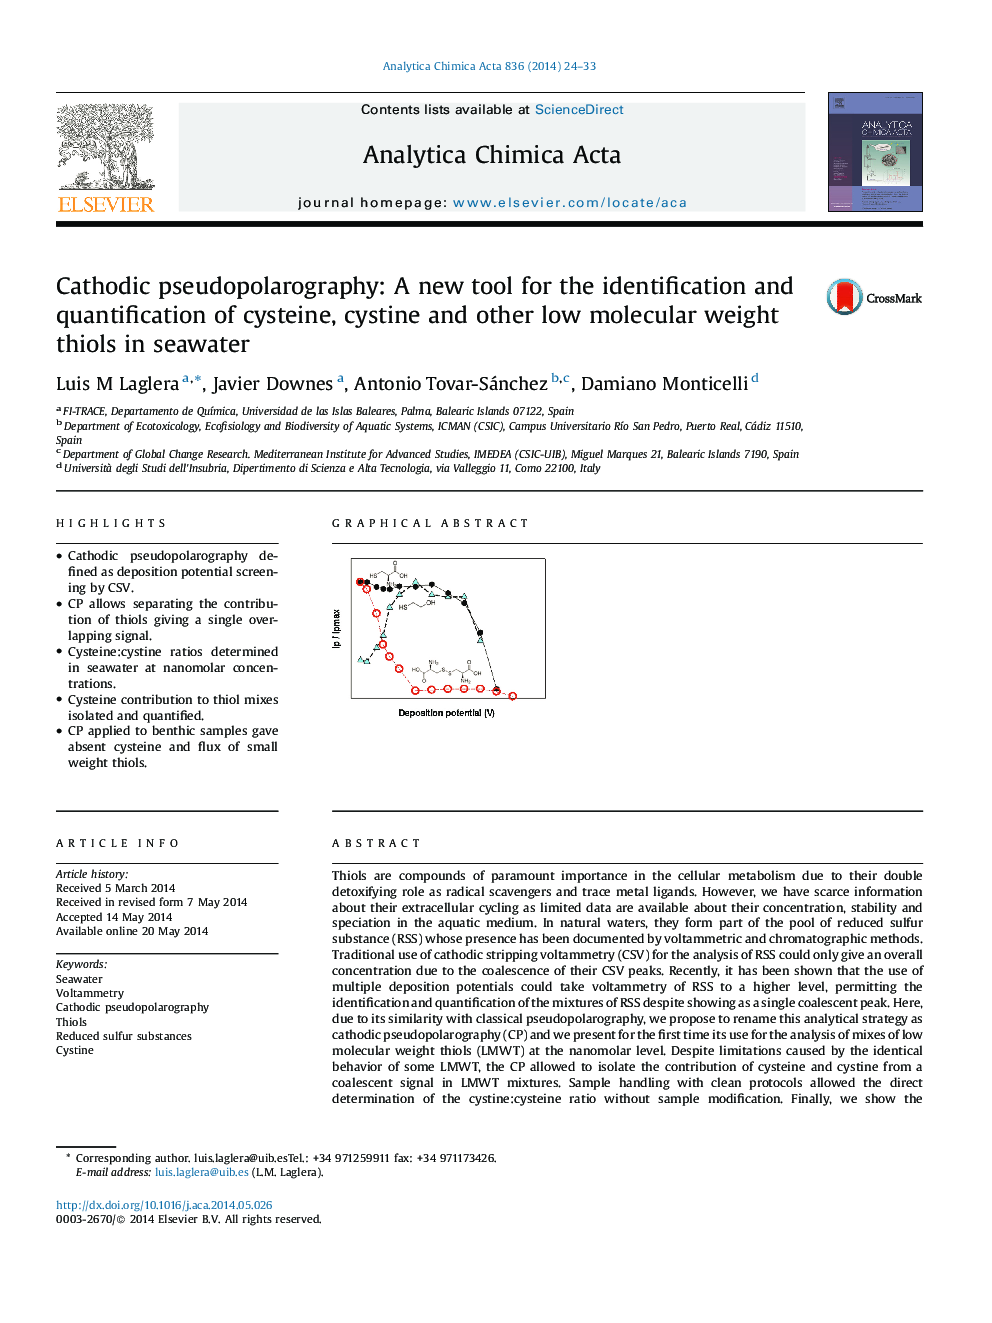 Cathodic pseudopolarography: A new tool for the identification and quantification of cysteine, cystine and other low molecular weight thiols in seawater